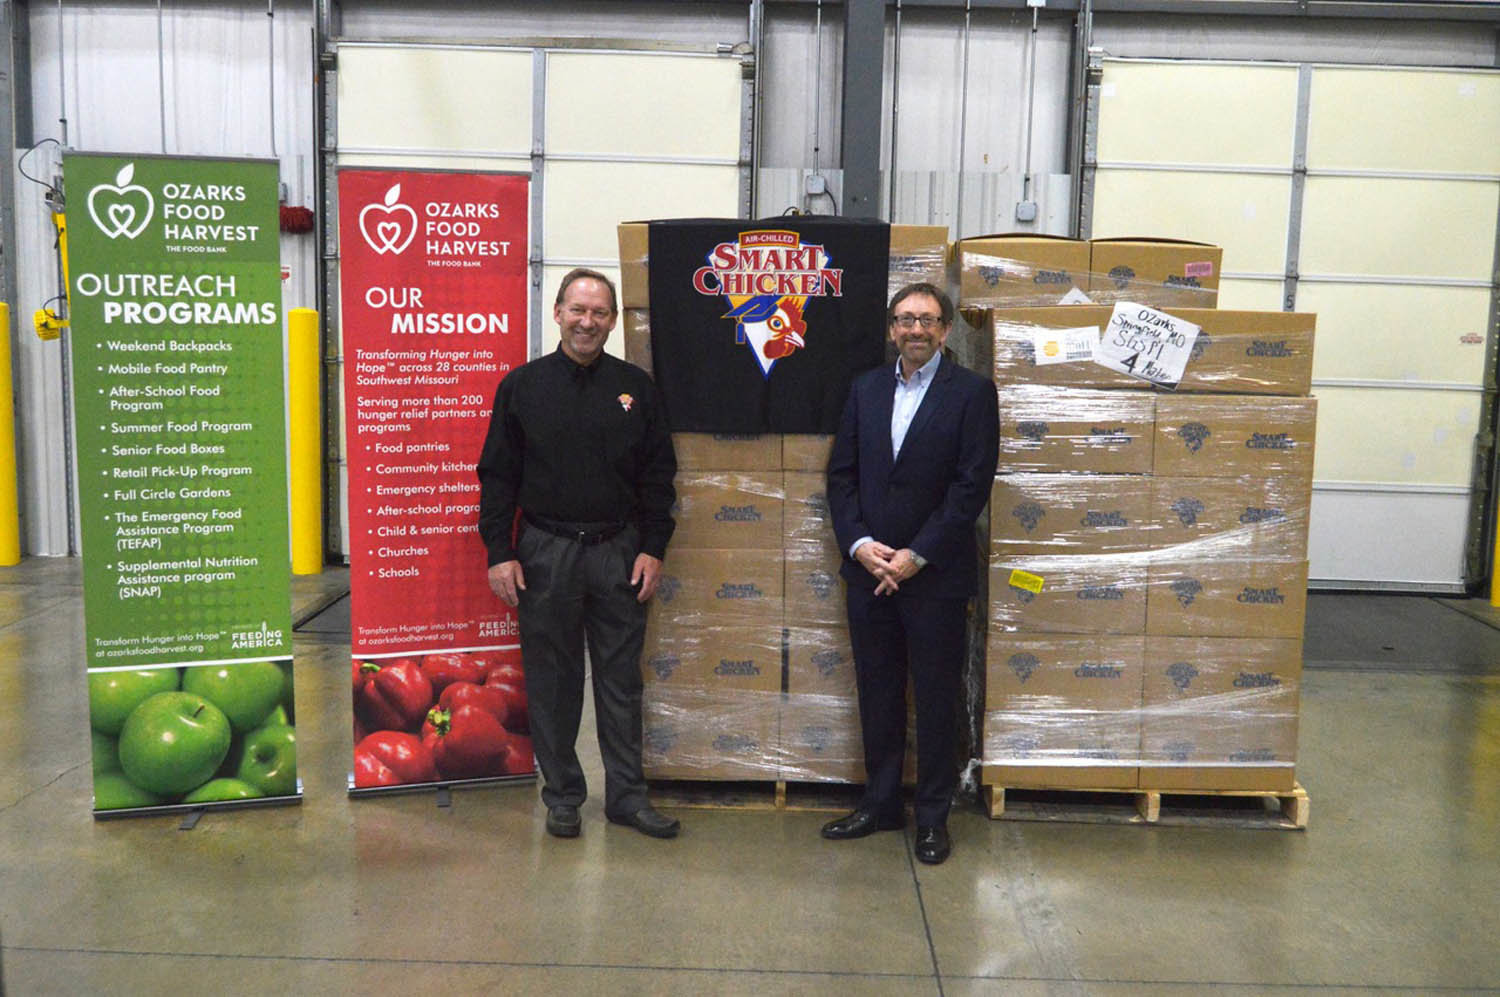 SMART GIVING
Nebraska-based Smart Chicken donated 7,000 pounds of chicken Dec. 18, 2019, to Ozarks Food Harvest Inc. as part of the company’s 17th annual Smart Giving Holiday Challenge campaign. Pictured are Joe Horvath, account manager for Smart Chicken, left, and Bart Brown, president and CEO of Ozarks Food Harvest. During the challenge in November, Smart Chicken donates 10% of poultry purchased at area retailers, including Harter House, Price Cutter, Country Mart and Food 4 Less.